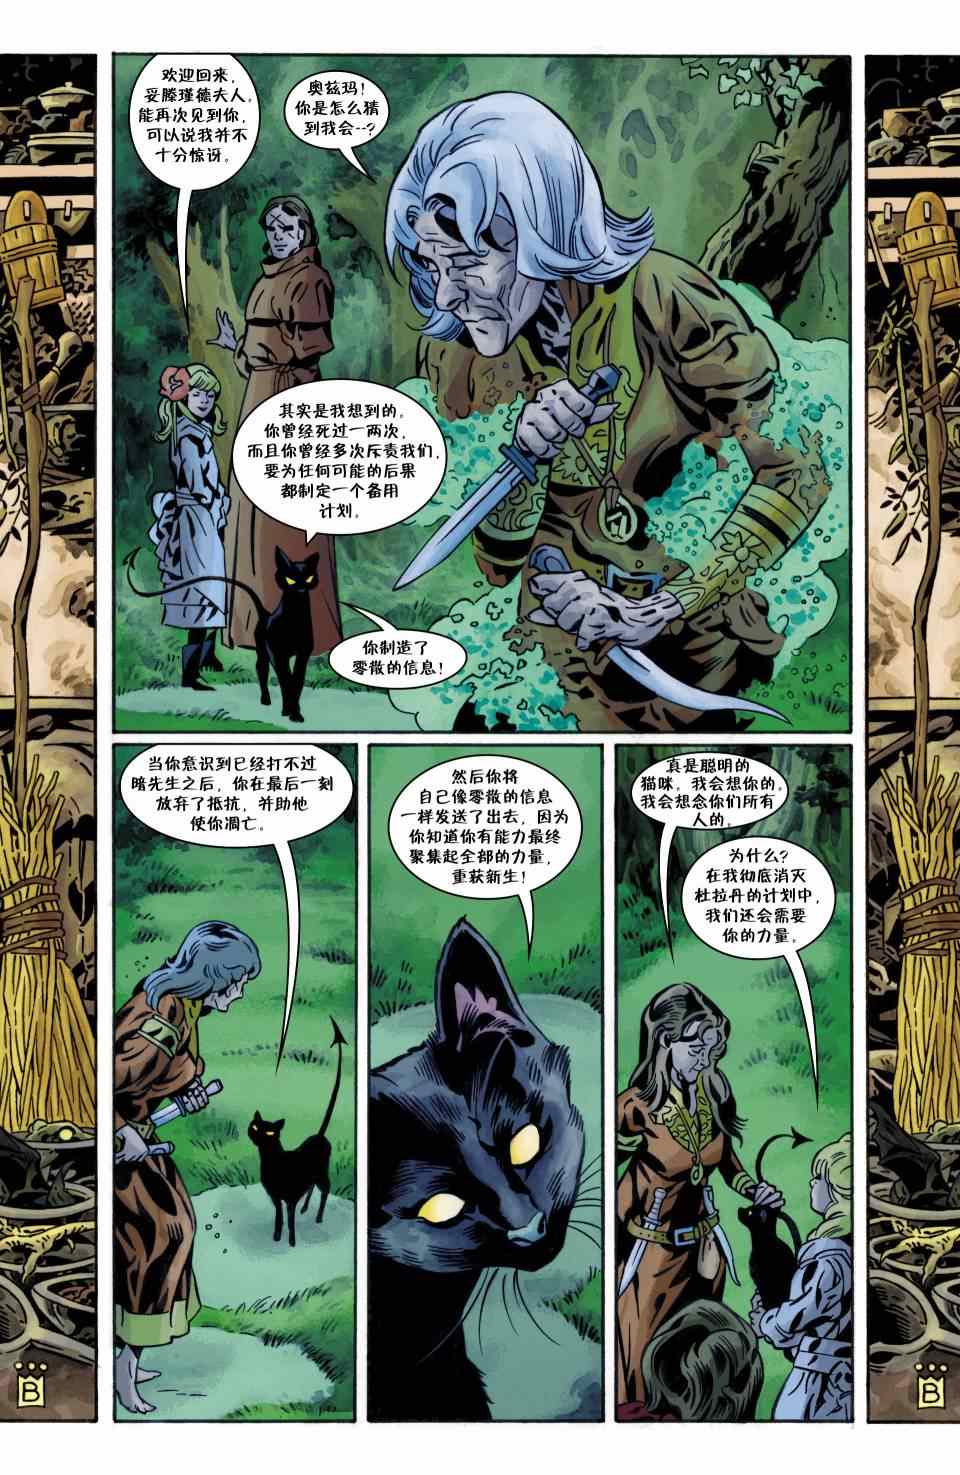 《Fables》漫画 100卷